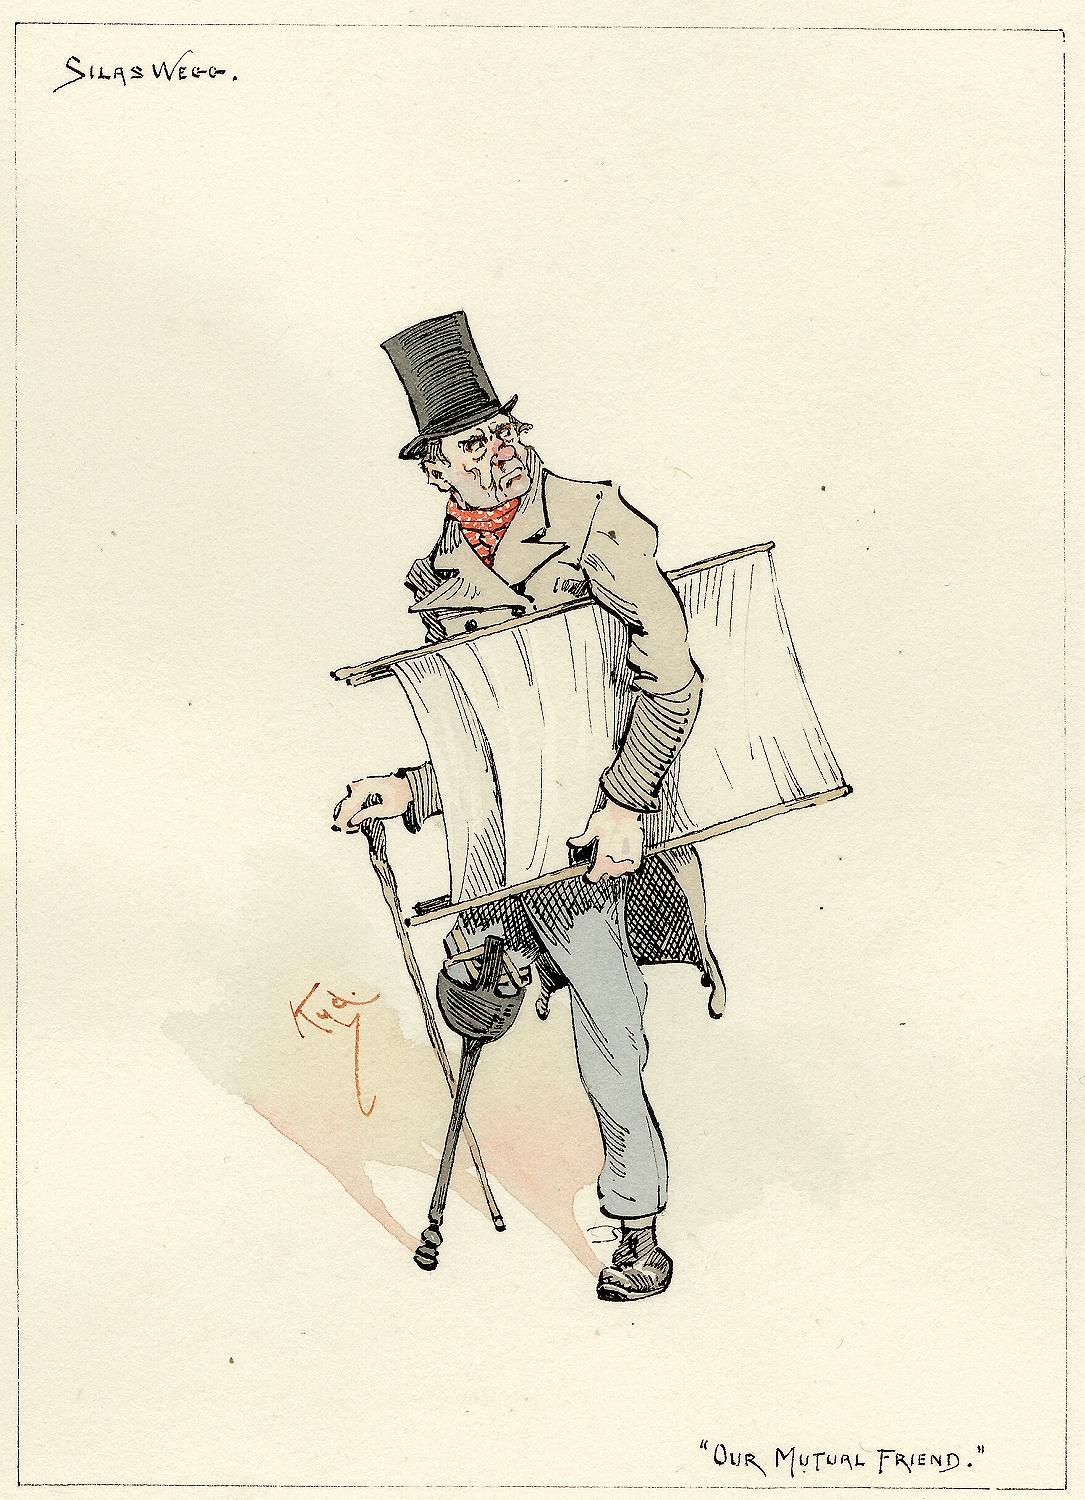 AUTHOR: CLARKE, Joseph Clayton (KYD) (Charles Dickens). 

TITLE: Silas Wegg (from Our Mutual Friend)

PUBLISHER: England, [c. 1920]

DESCRIPTION: ORIGINAL INK AND WATERCOLOR SKETCH. 1 leaf, on paper, image 5-15/16